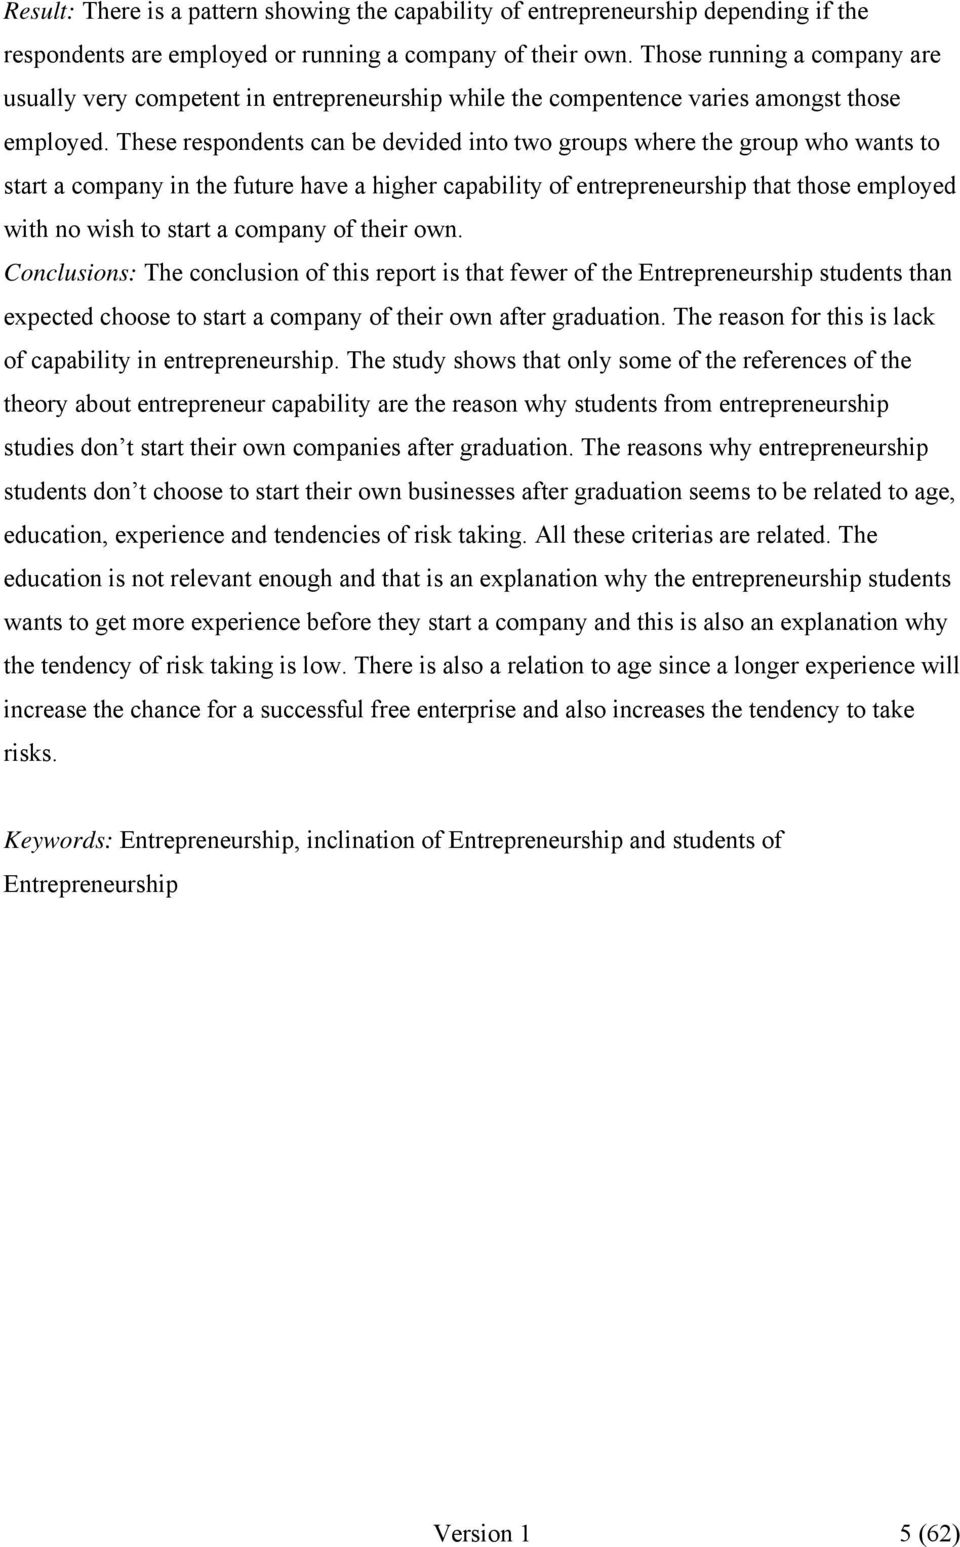 These respondents can be devided into two groups where the group who wants to start a company in the future have a higher capability of entrepreneurship that those employed with no wish to start a